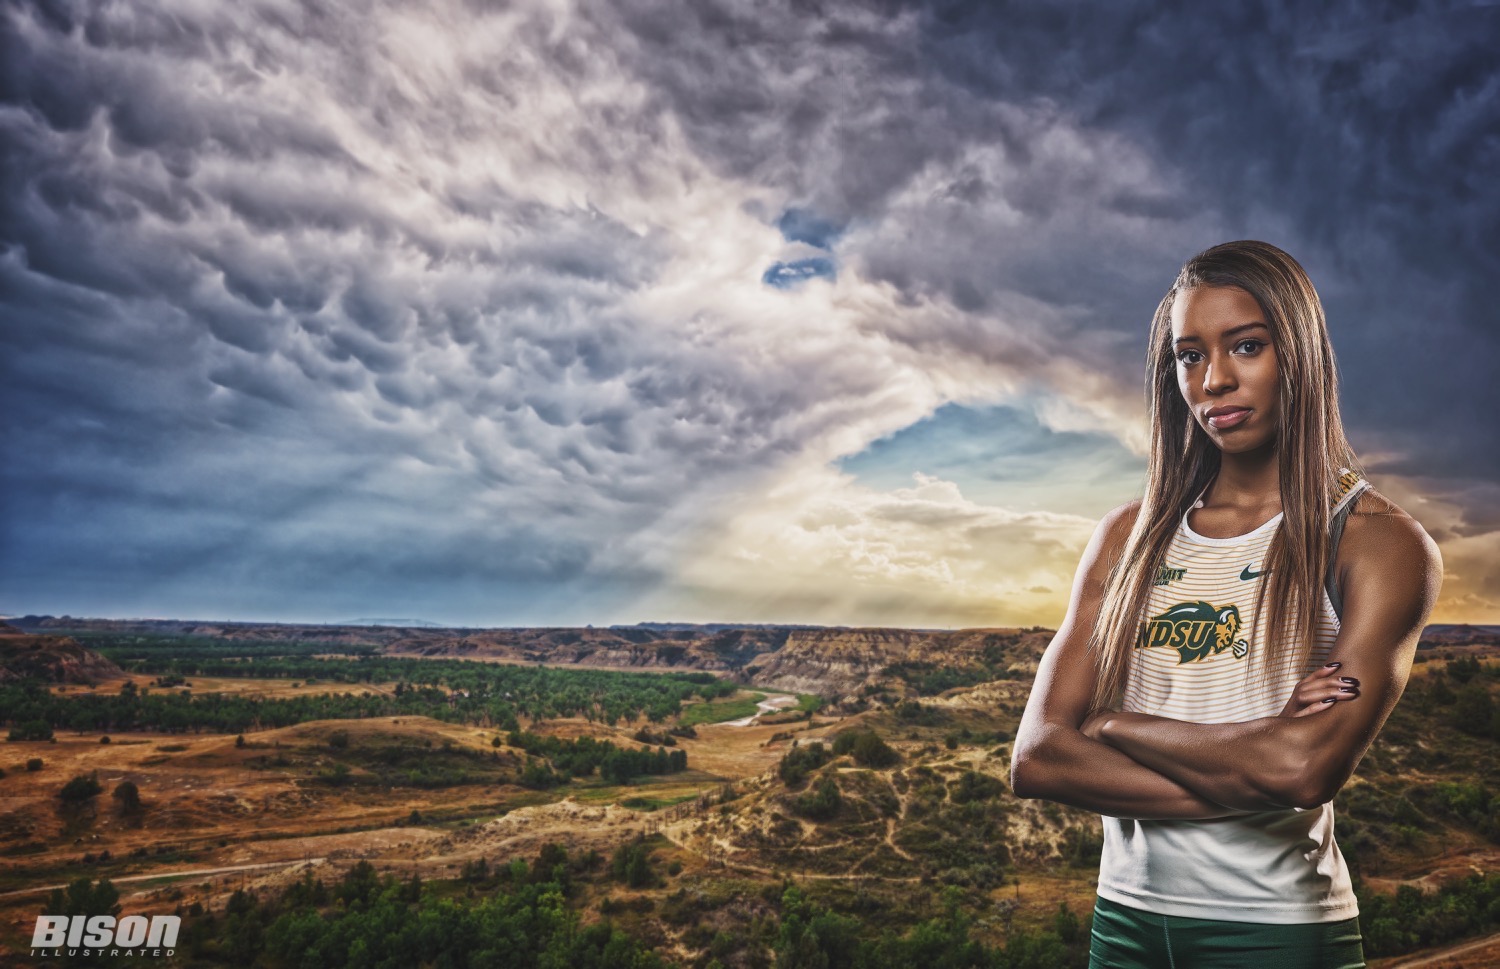 Alexis Woods NDSU track and field